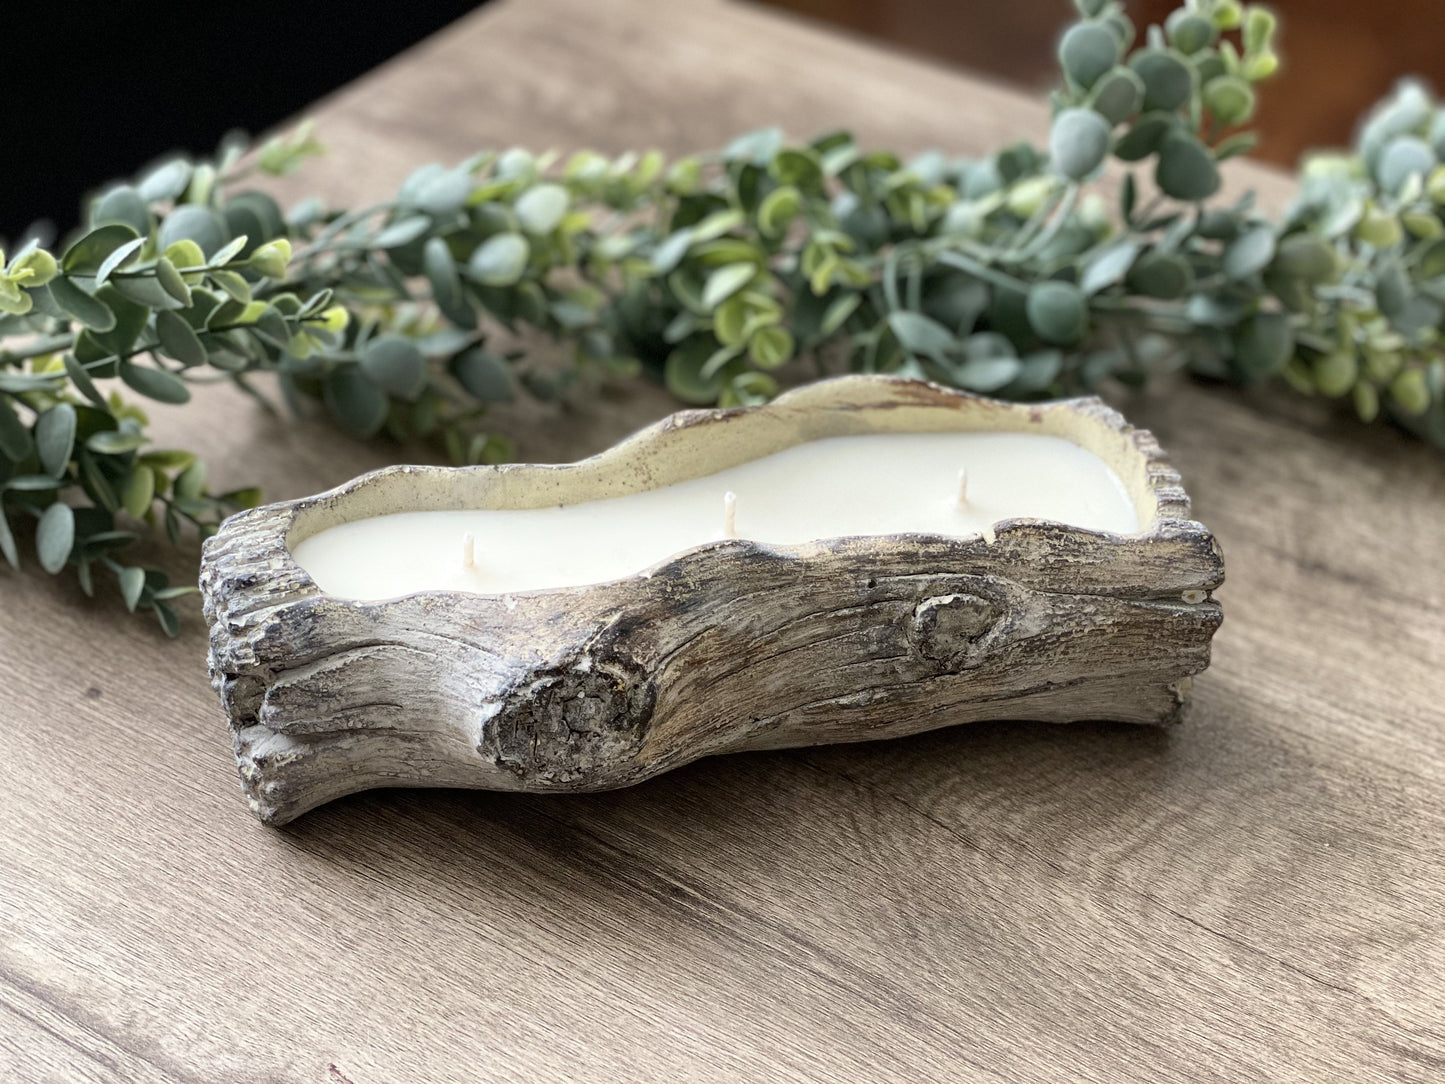 Cement Tree Log Decor Candle | Magnolia | 12 oz. magnolia, bergamot, peony. A unique piece of home decor that works perfectly for indoor and outdoor space. When you finished the candle, this cement log can be used as planter, serving dish and decorative holder. Bluffton Candles - The Bluffton Shop - Gift Shops